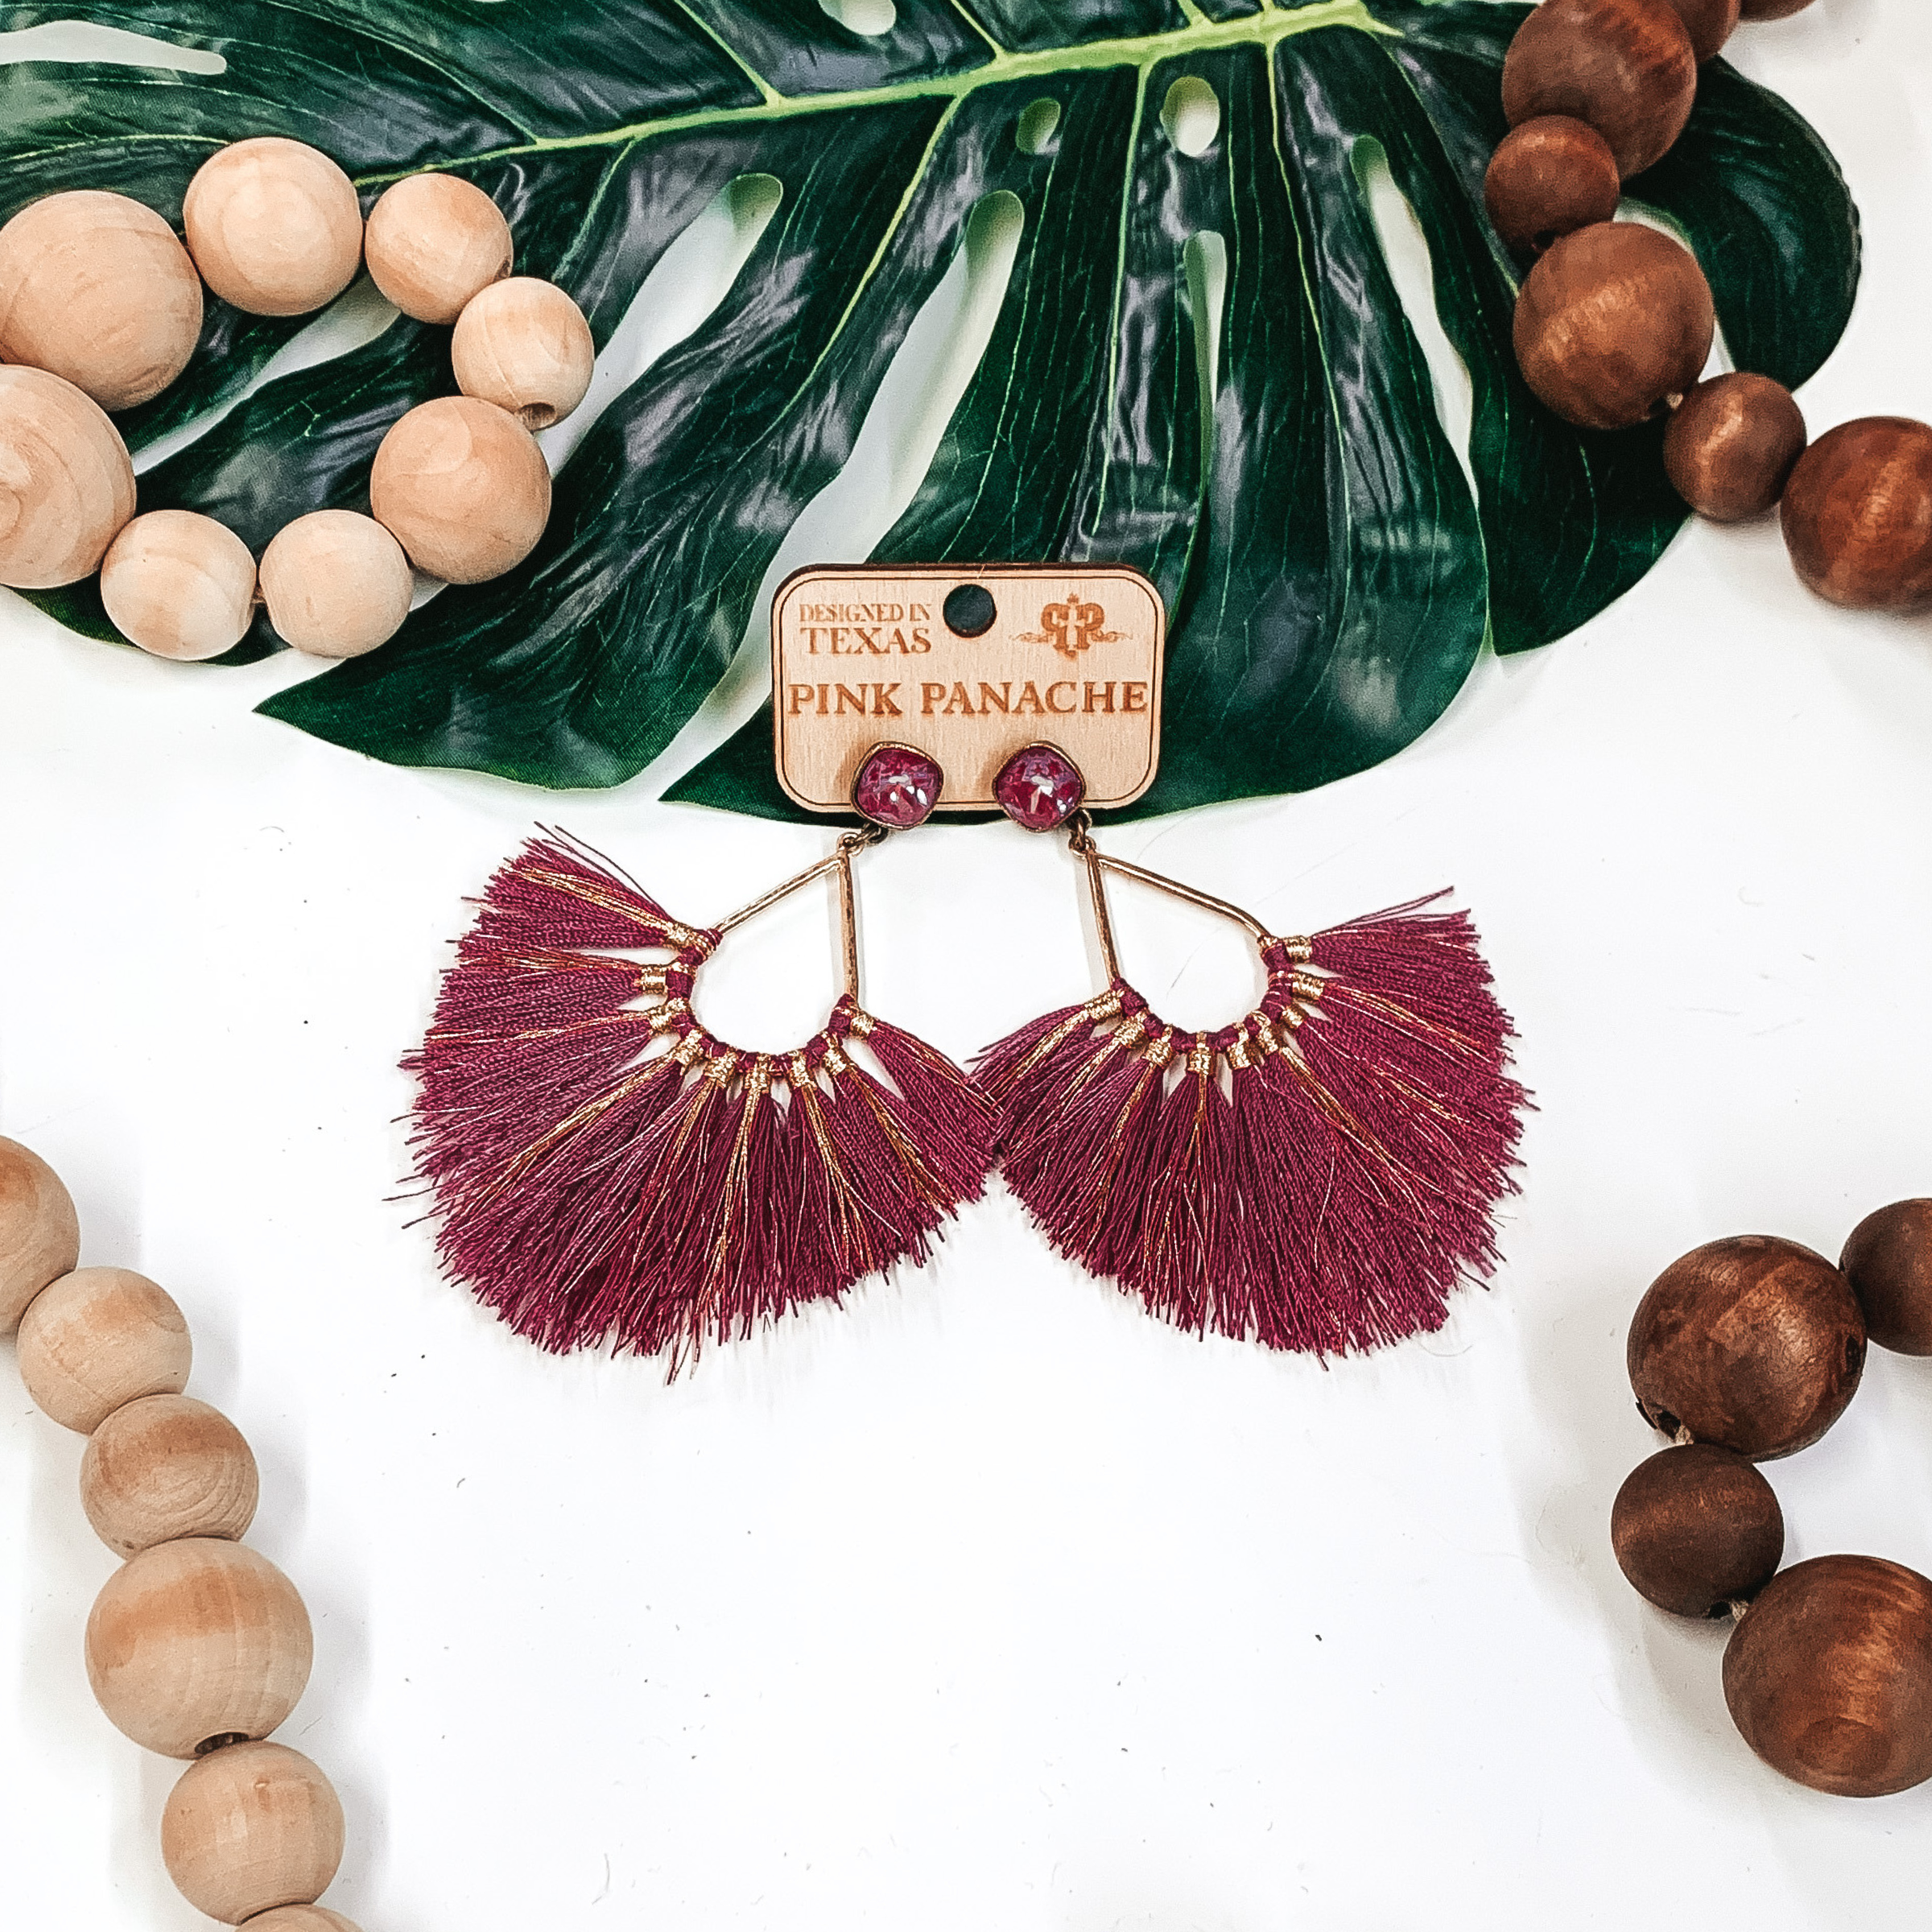 Pink Panache | Teardrop Earrings with Fringe Detailing in Fuchsia - Giddy Up Glamour Boutique